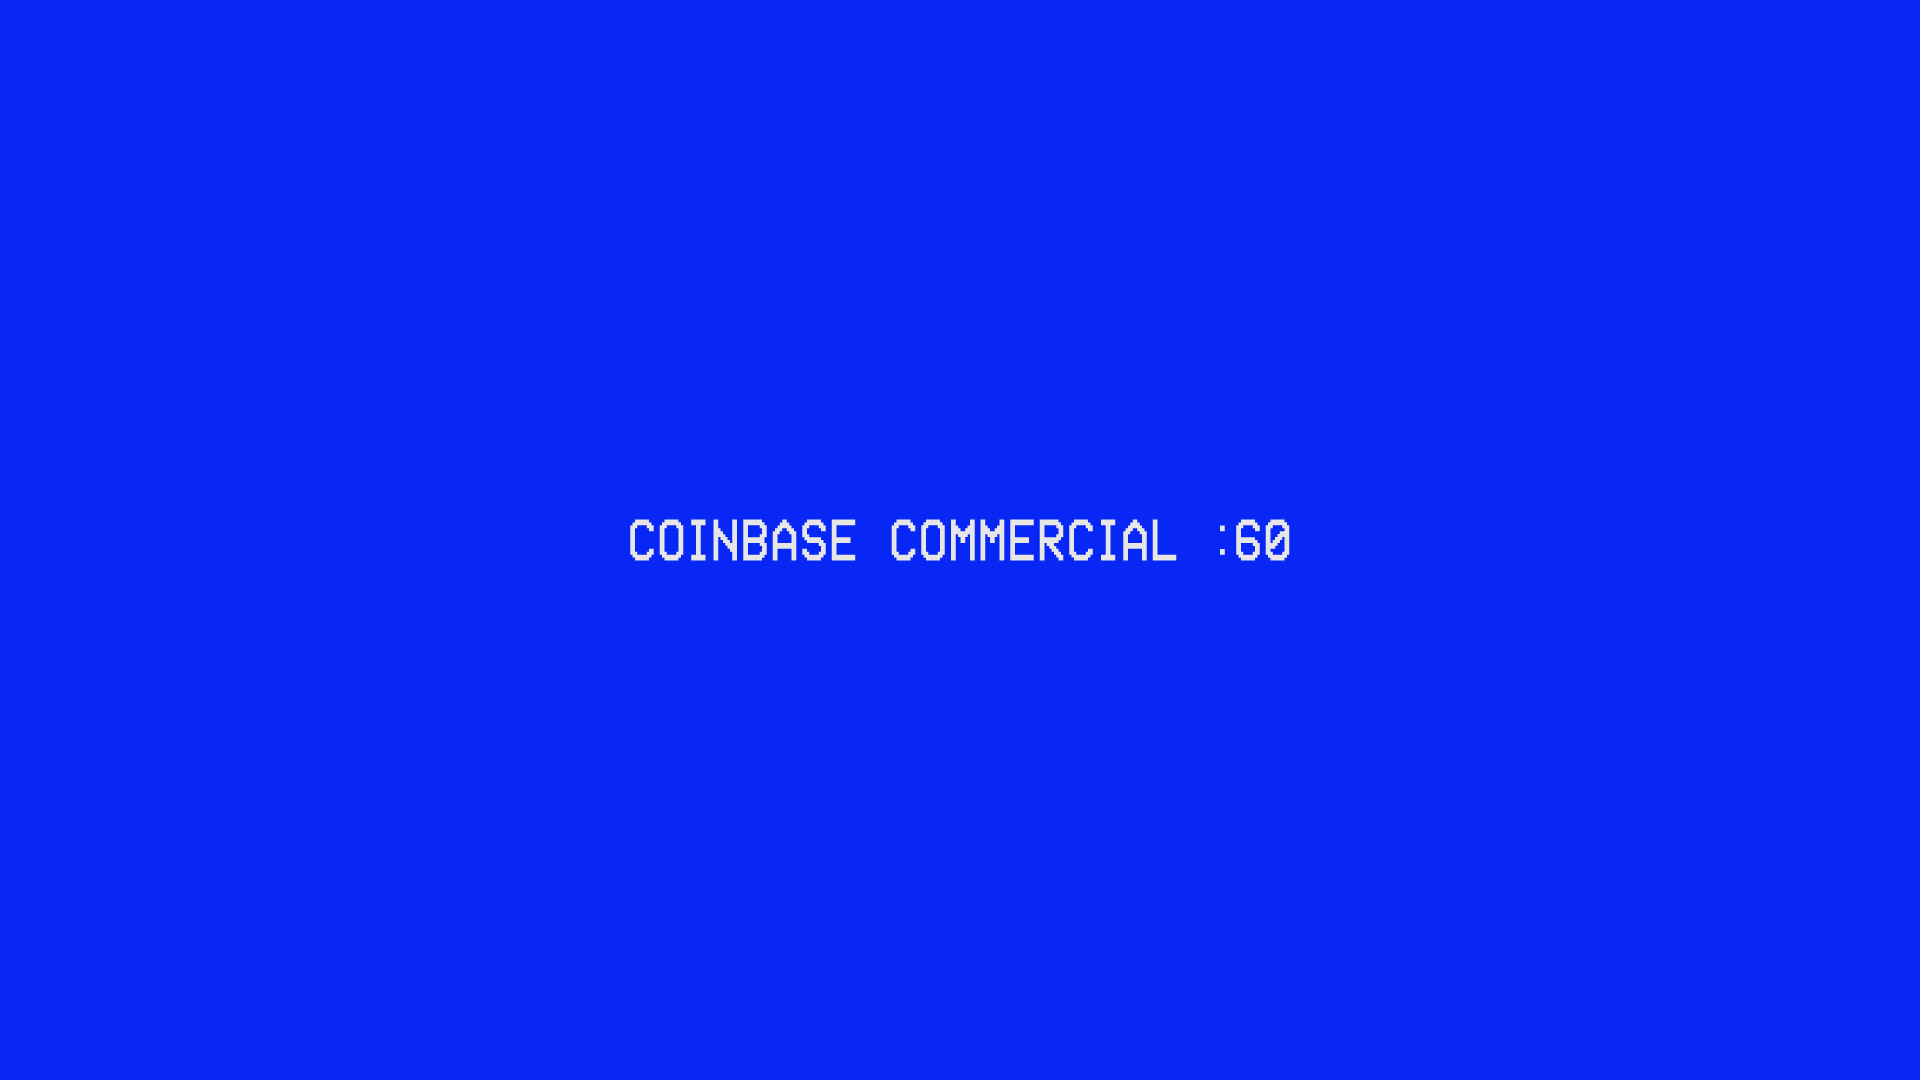 How a Desire to “Try Something Different” Led to Coinbase’s QR Code Super Bowl Ad